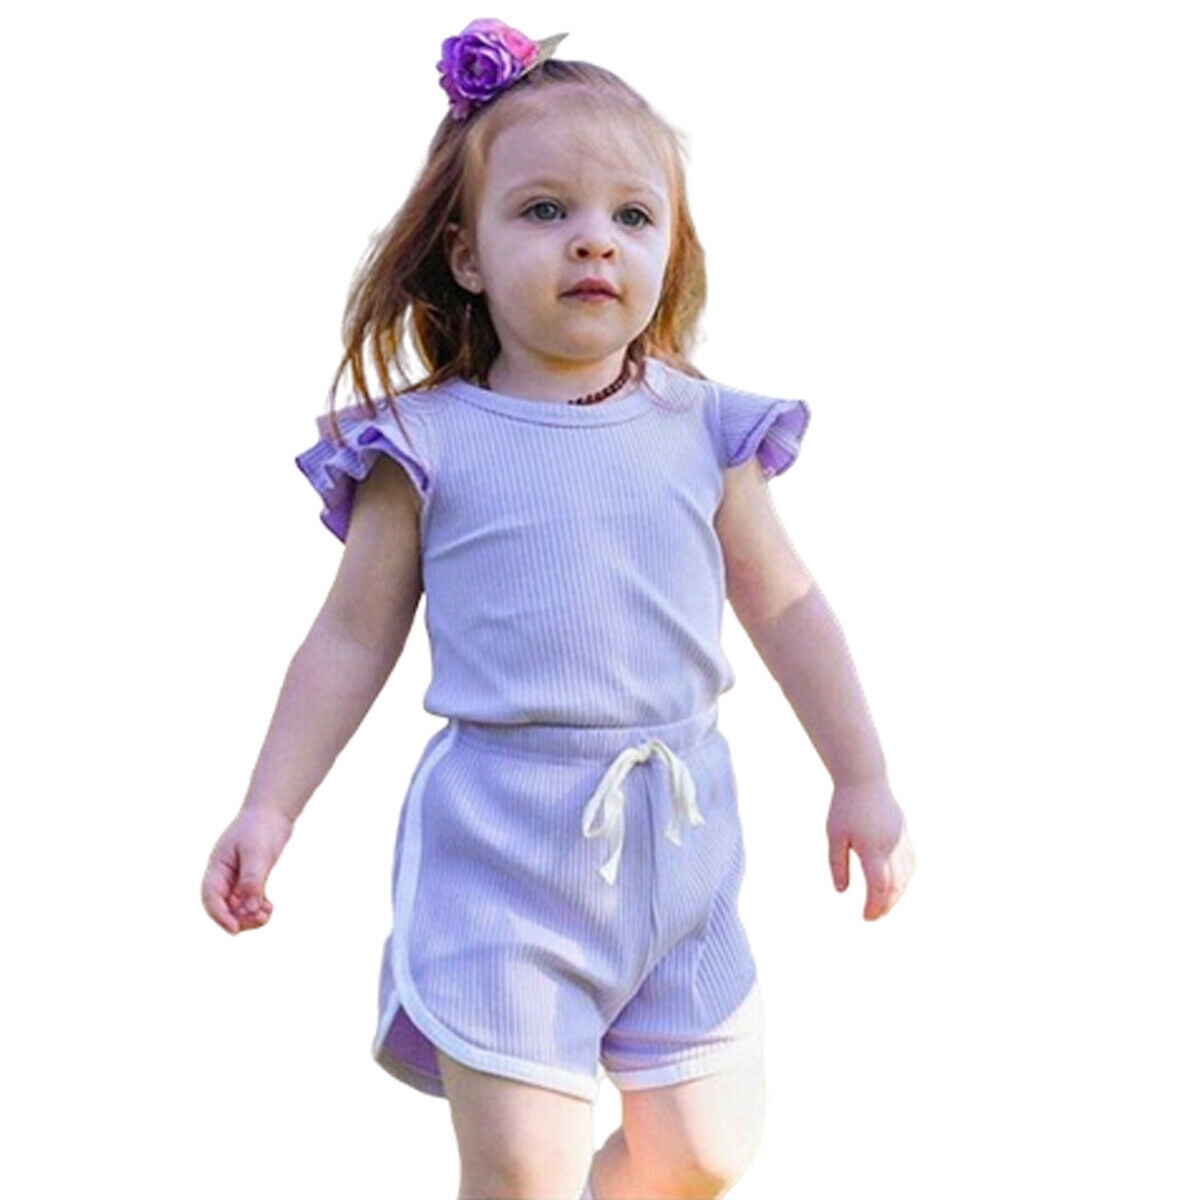 Pants Details about   Kids Girls Clothes Outfit Girl Infant Baby Clothing Outfits Sets Tops 